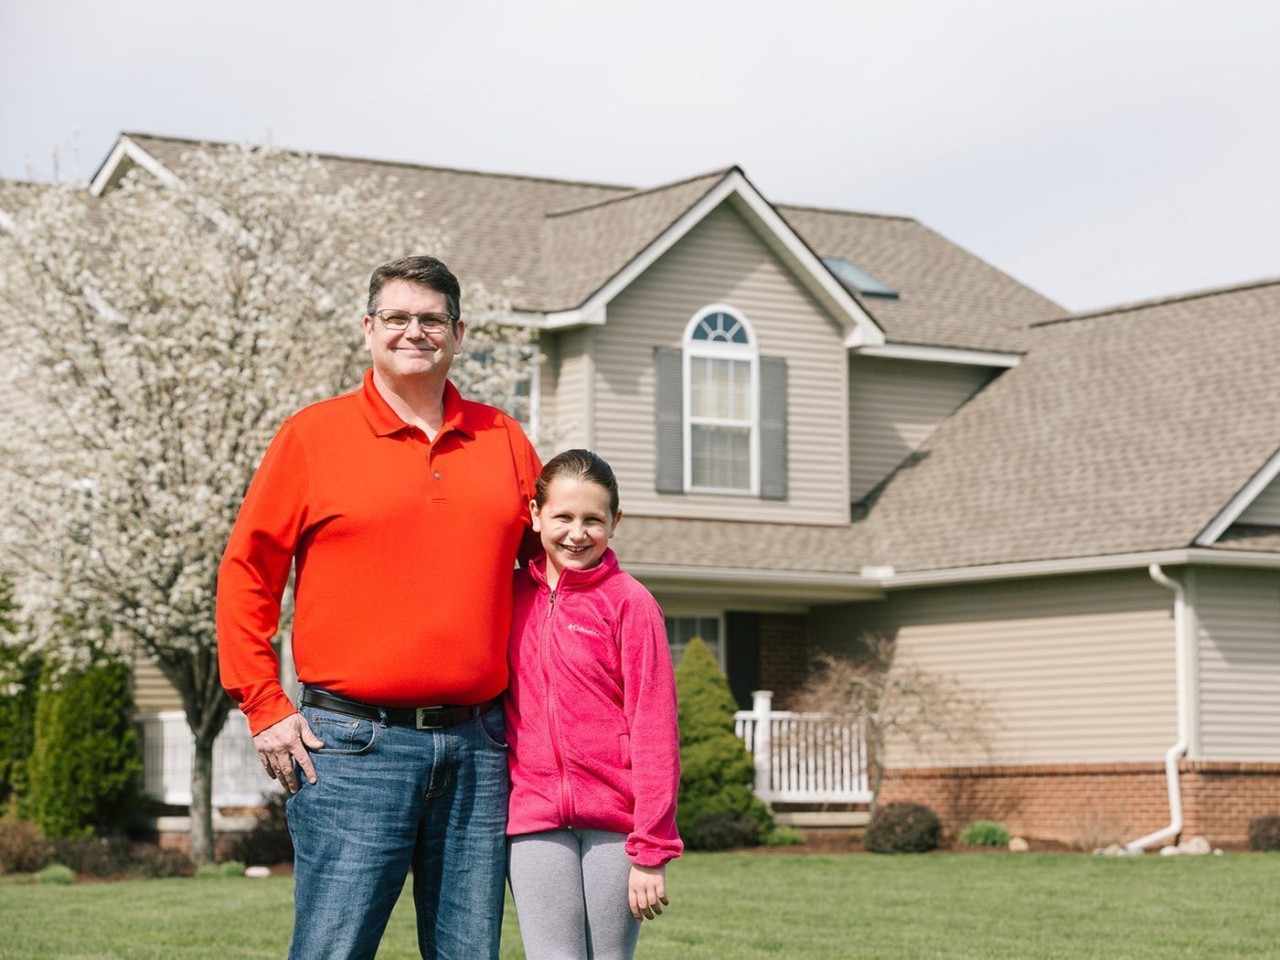 AAA member Patrick Harrell and his daughter, Natalie, outside their restored home